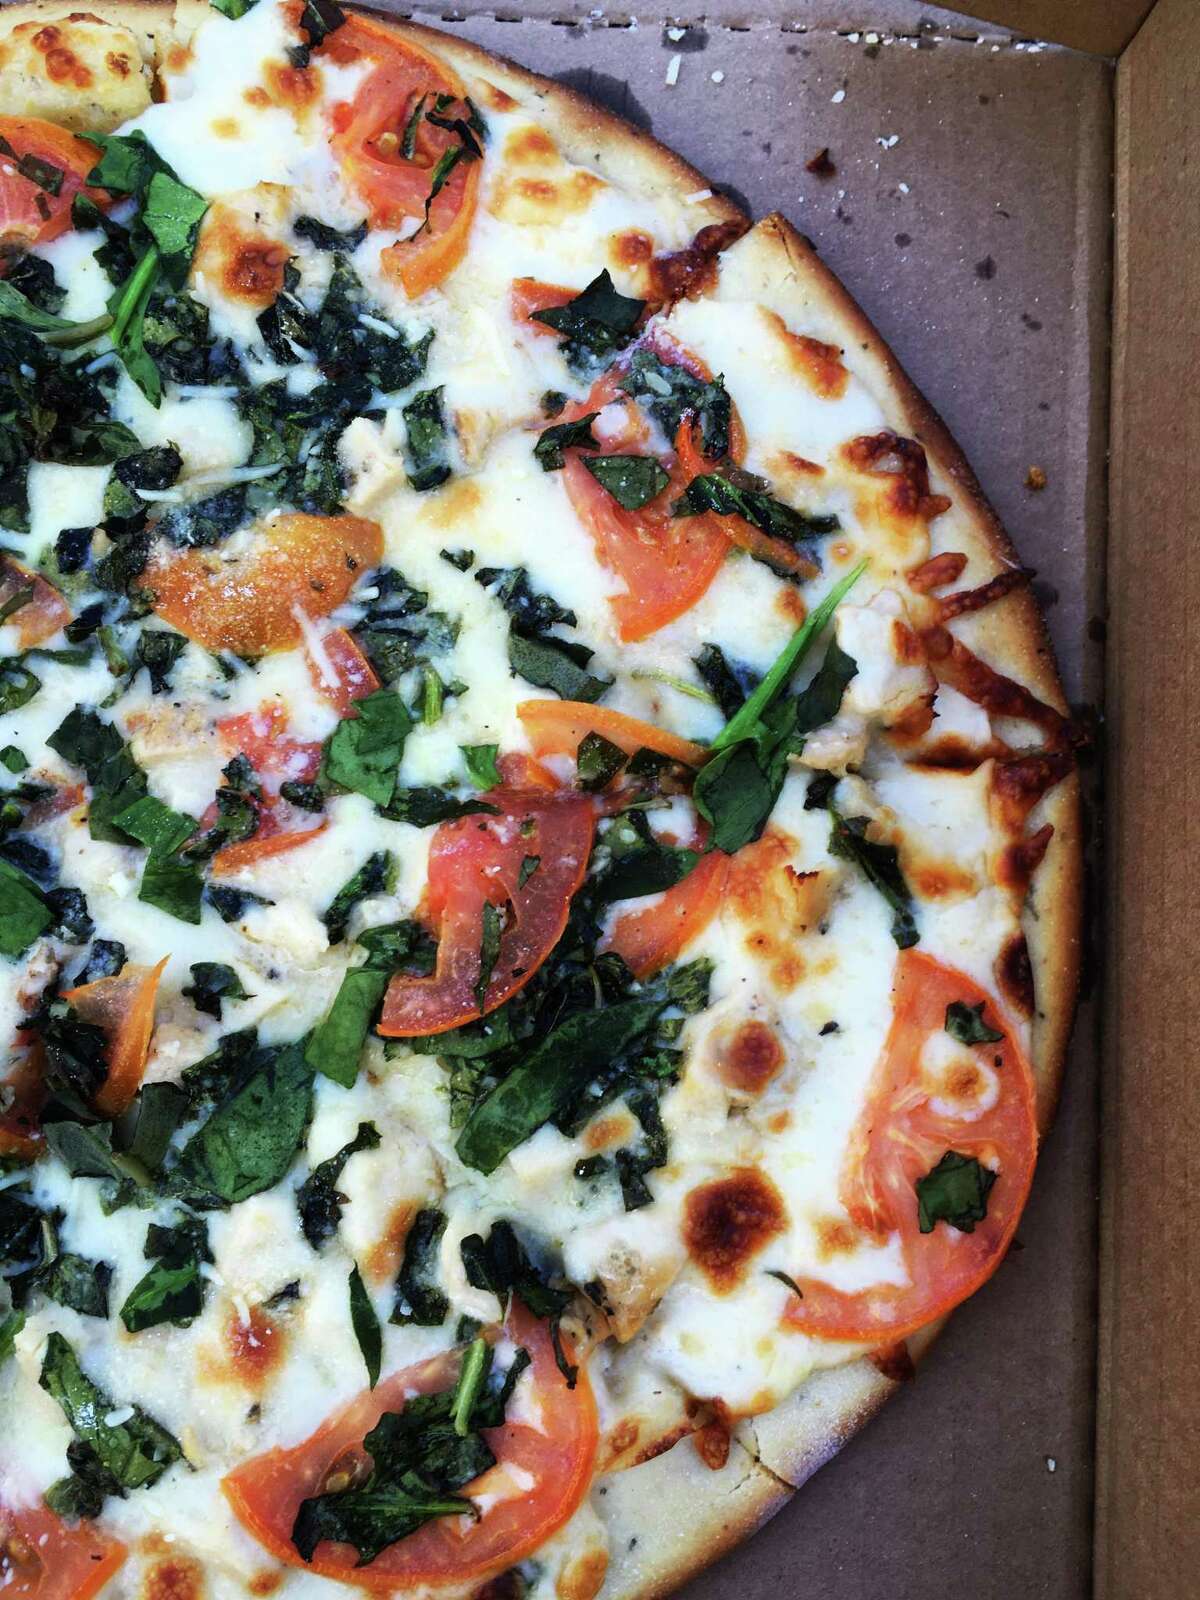 The chicken alfredo pizza with spinach is one of many specialty pizzas available at Hungry Chameleon Pizzeria.